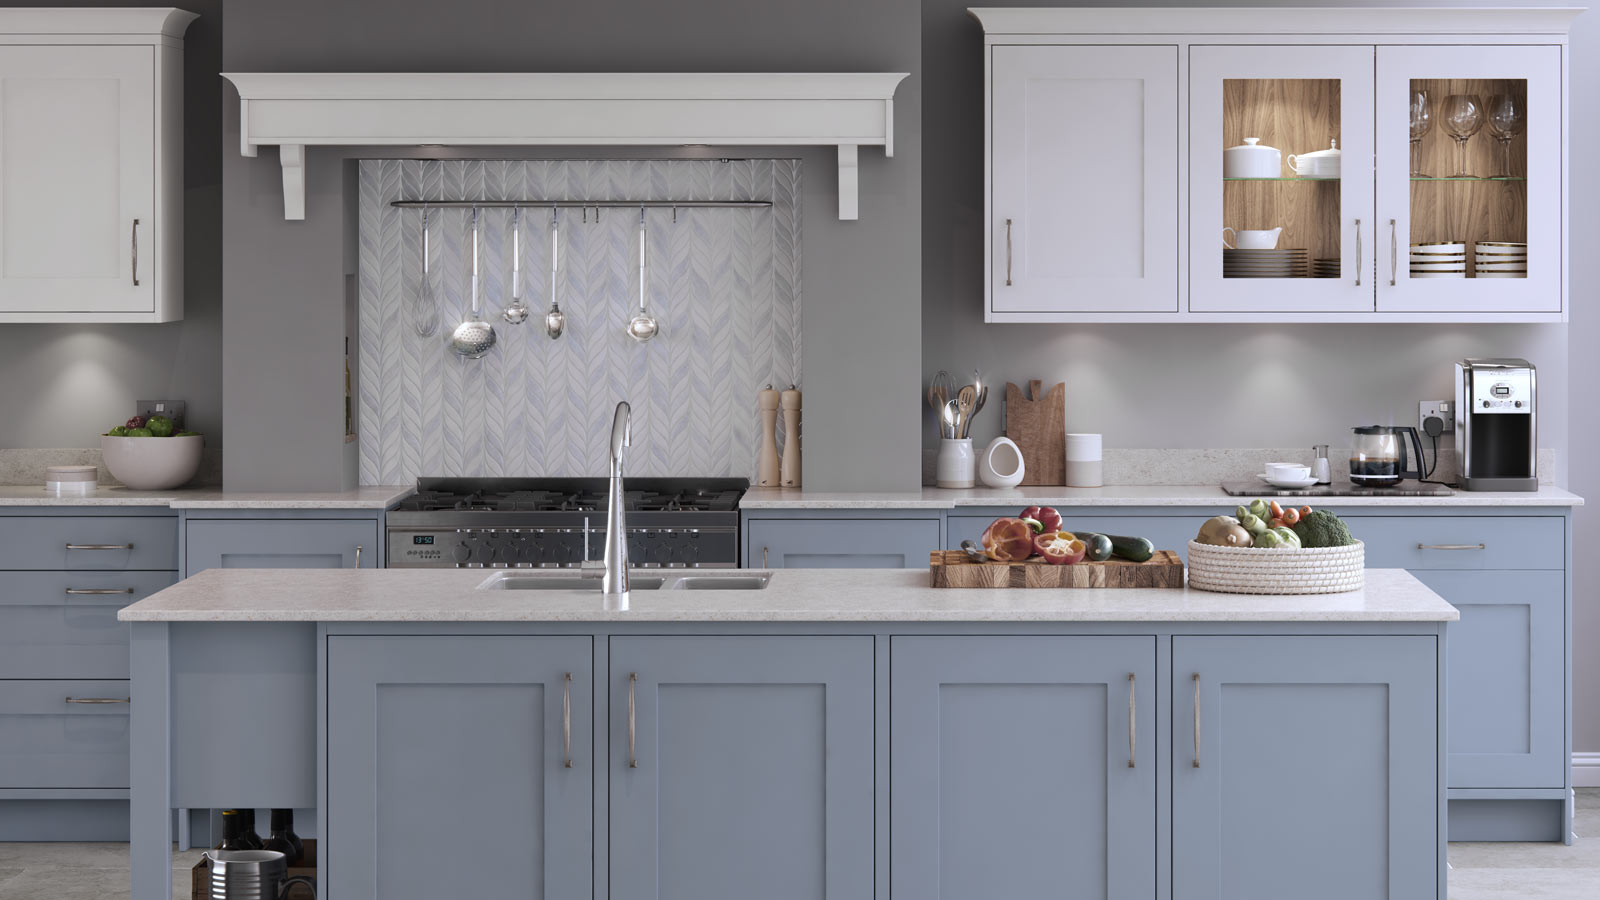 A traditional kitchen with light blue Shaker kitchen doors